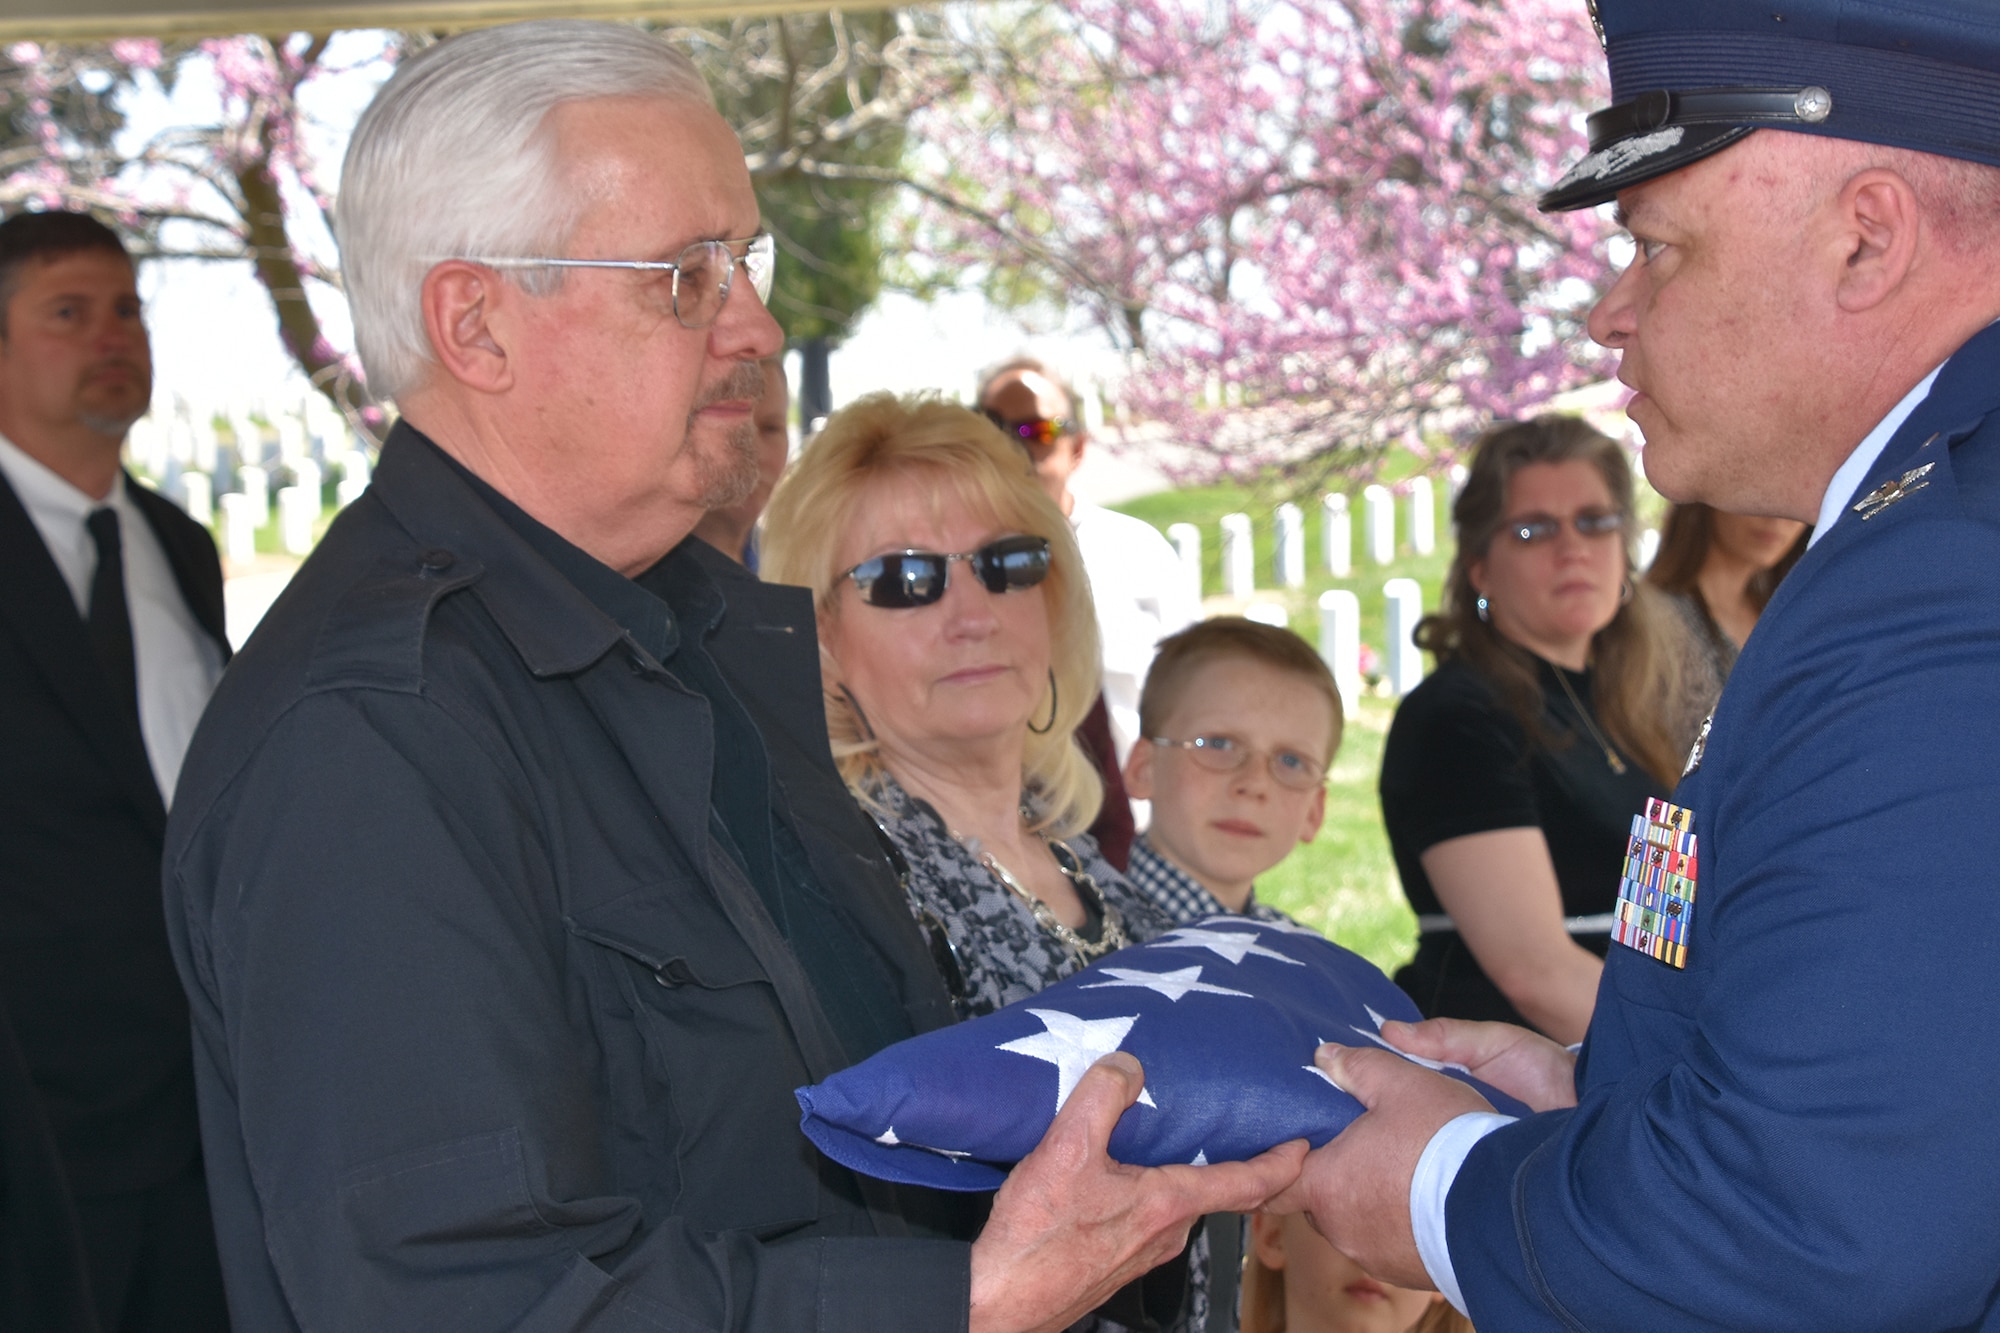 Col. Ken Eaves, 131st Bomb Wing commander, presents Jeffrey Zumwalt a tribute flag in honor of Zumwalt’s father, Brig. Gen. Harding Zumwalt, during a ceremony at Jefferson Barracks National Cemetery, April 30, 2018. Family, friends and Missouri Air National Guard family met to celebrate the life of the World War II combat aviator and former 131st Tactical Fighter Wing commander, Brig. Gen. Harding Zumwalt, who passed away in January at age 97.  (U.S. Air National Guard photo by Senior Master Sgt. Mary-Dale Amison)